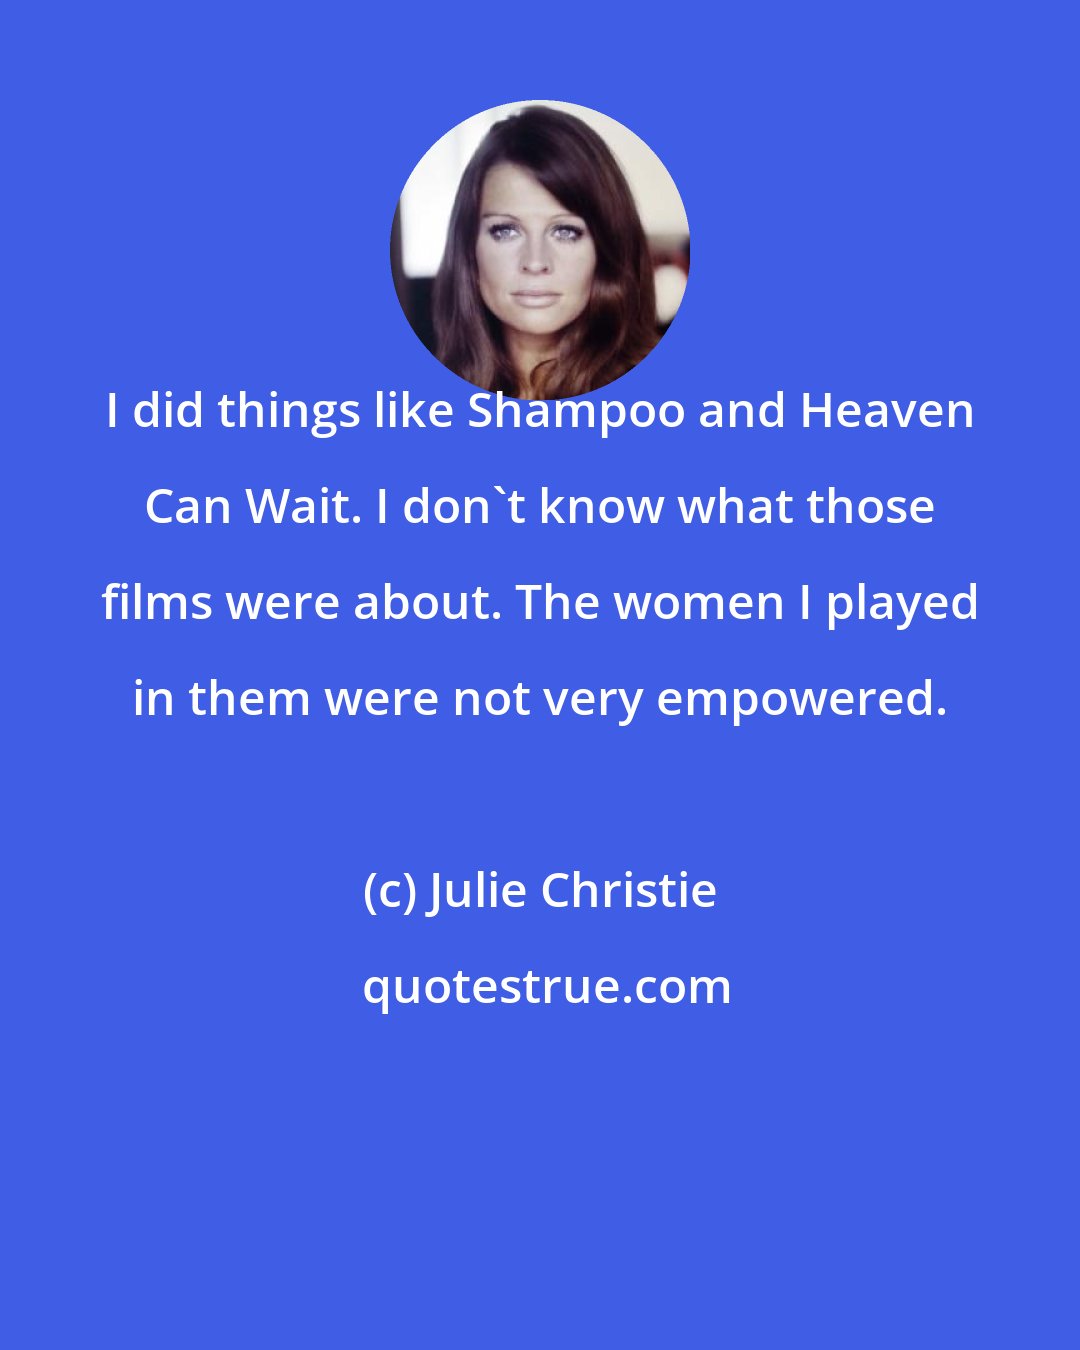 Julie Christie: I did things like Shampoo and Heaven Can Wait. I don't know what those films were about. The women I played in them were not very empowered.